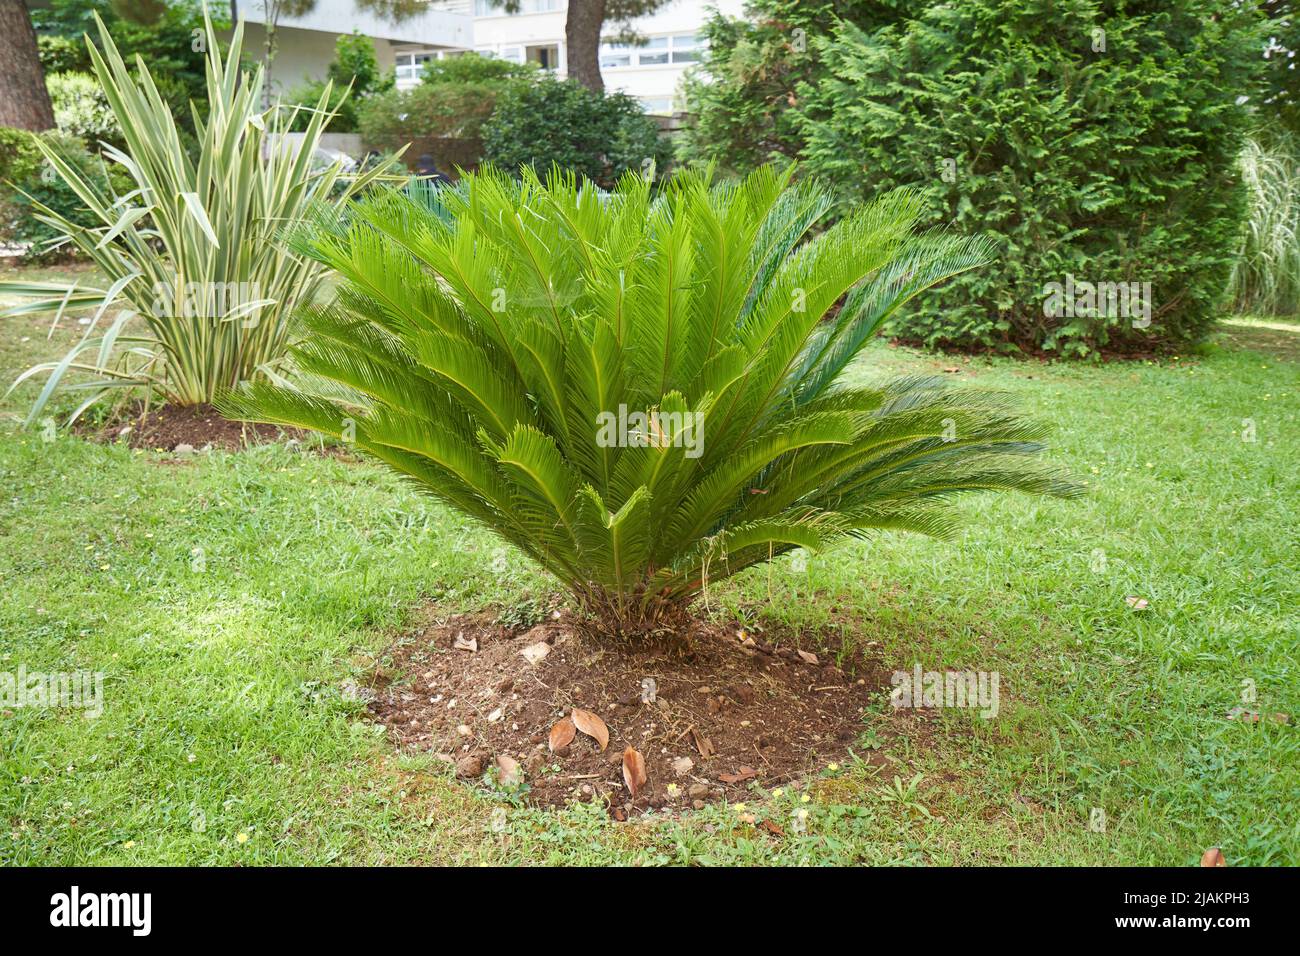 Cycas palm plant planted in a lawn garden Stock Photo